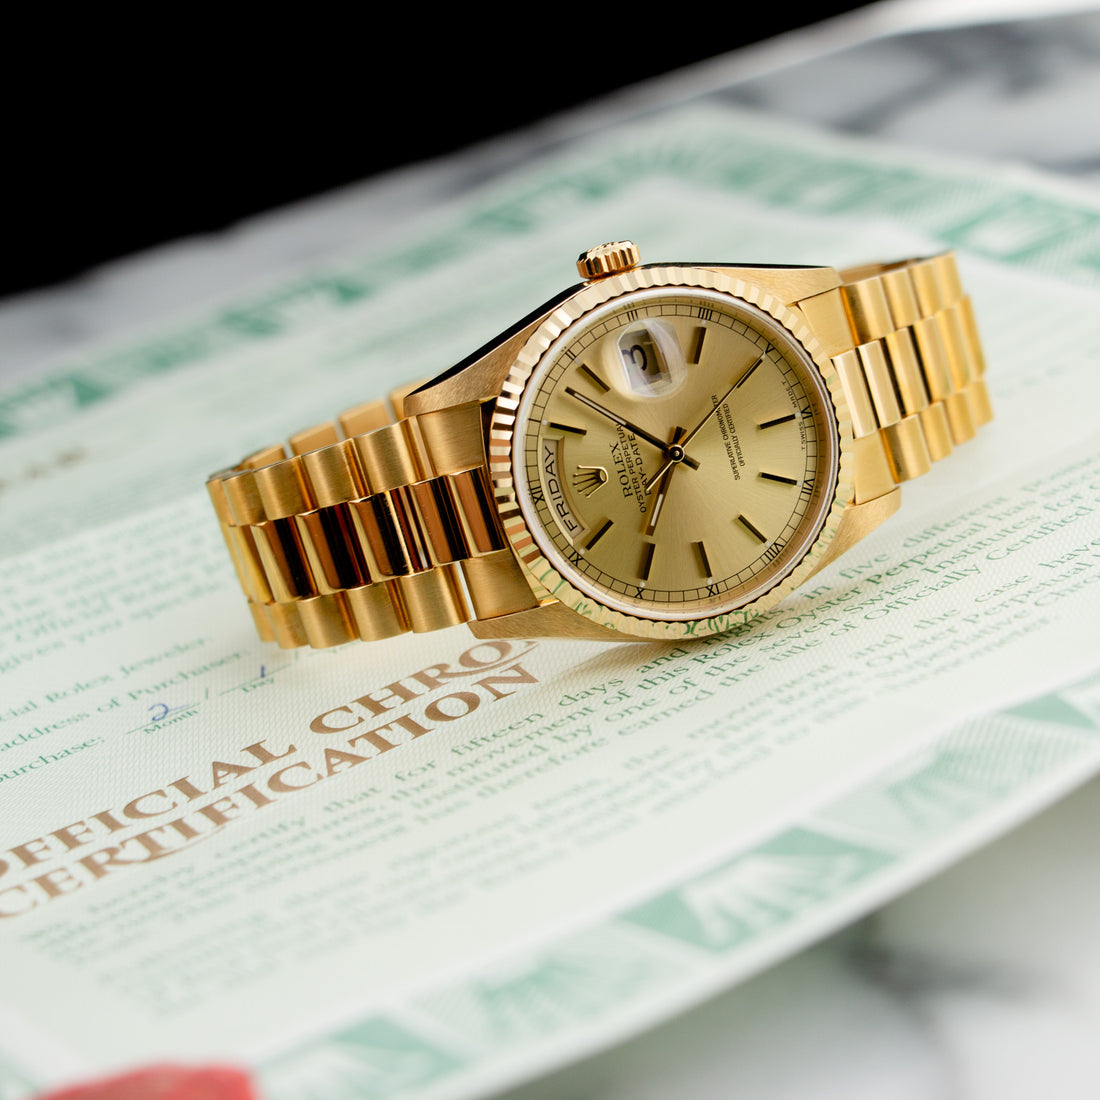 Rolex Yellow Gold Day-Date Watch Ref. 18238 in New Old Stock Condition